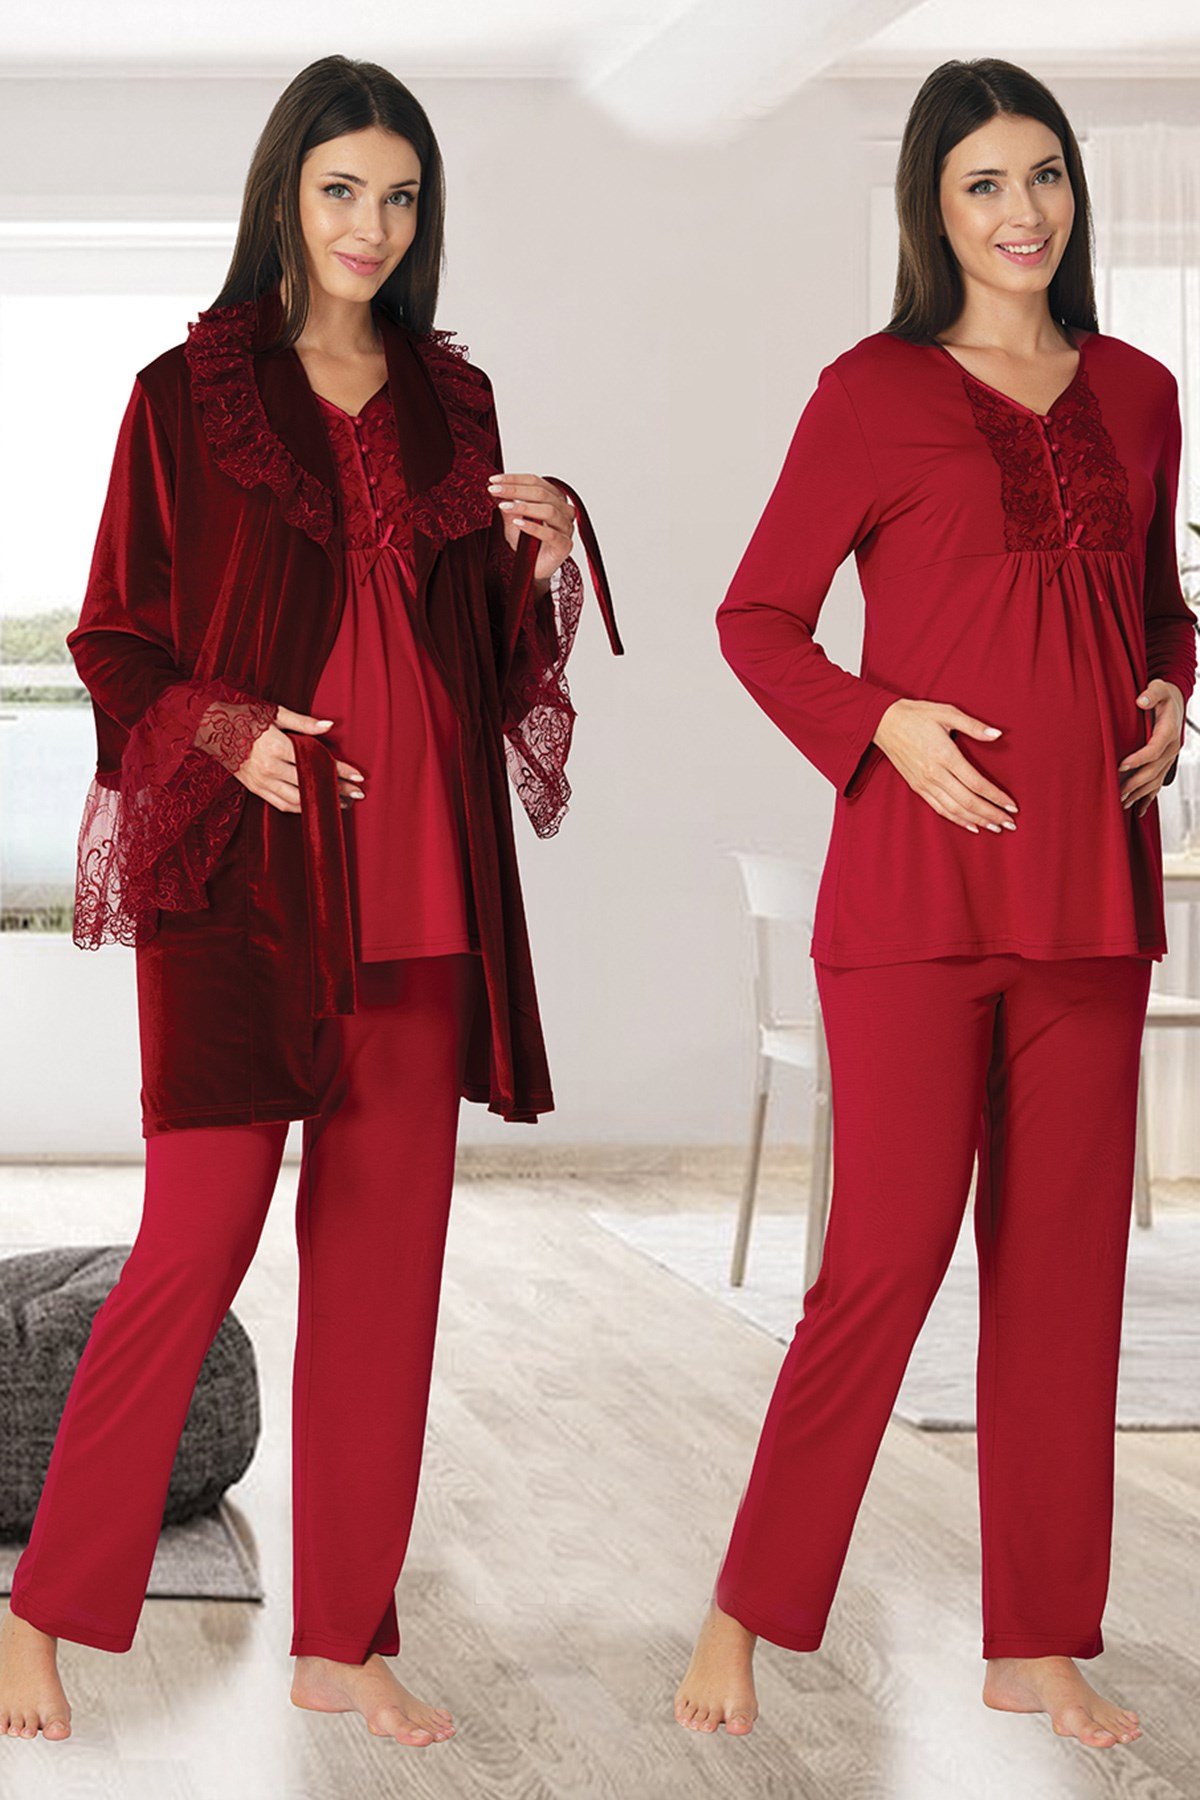 Effortt 8088 Cherry Red Velvet Lace Detailed Maternity Pajama with Robe Sets